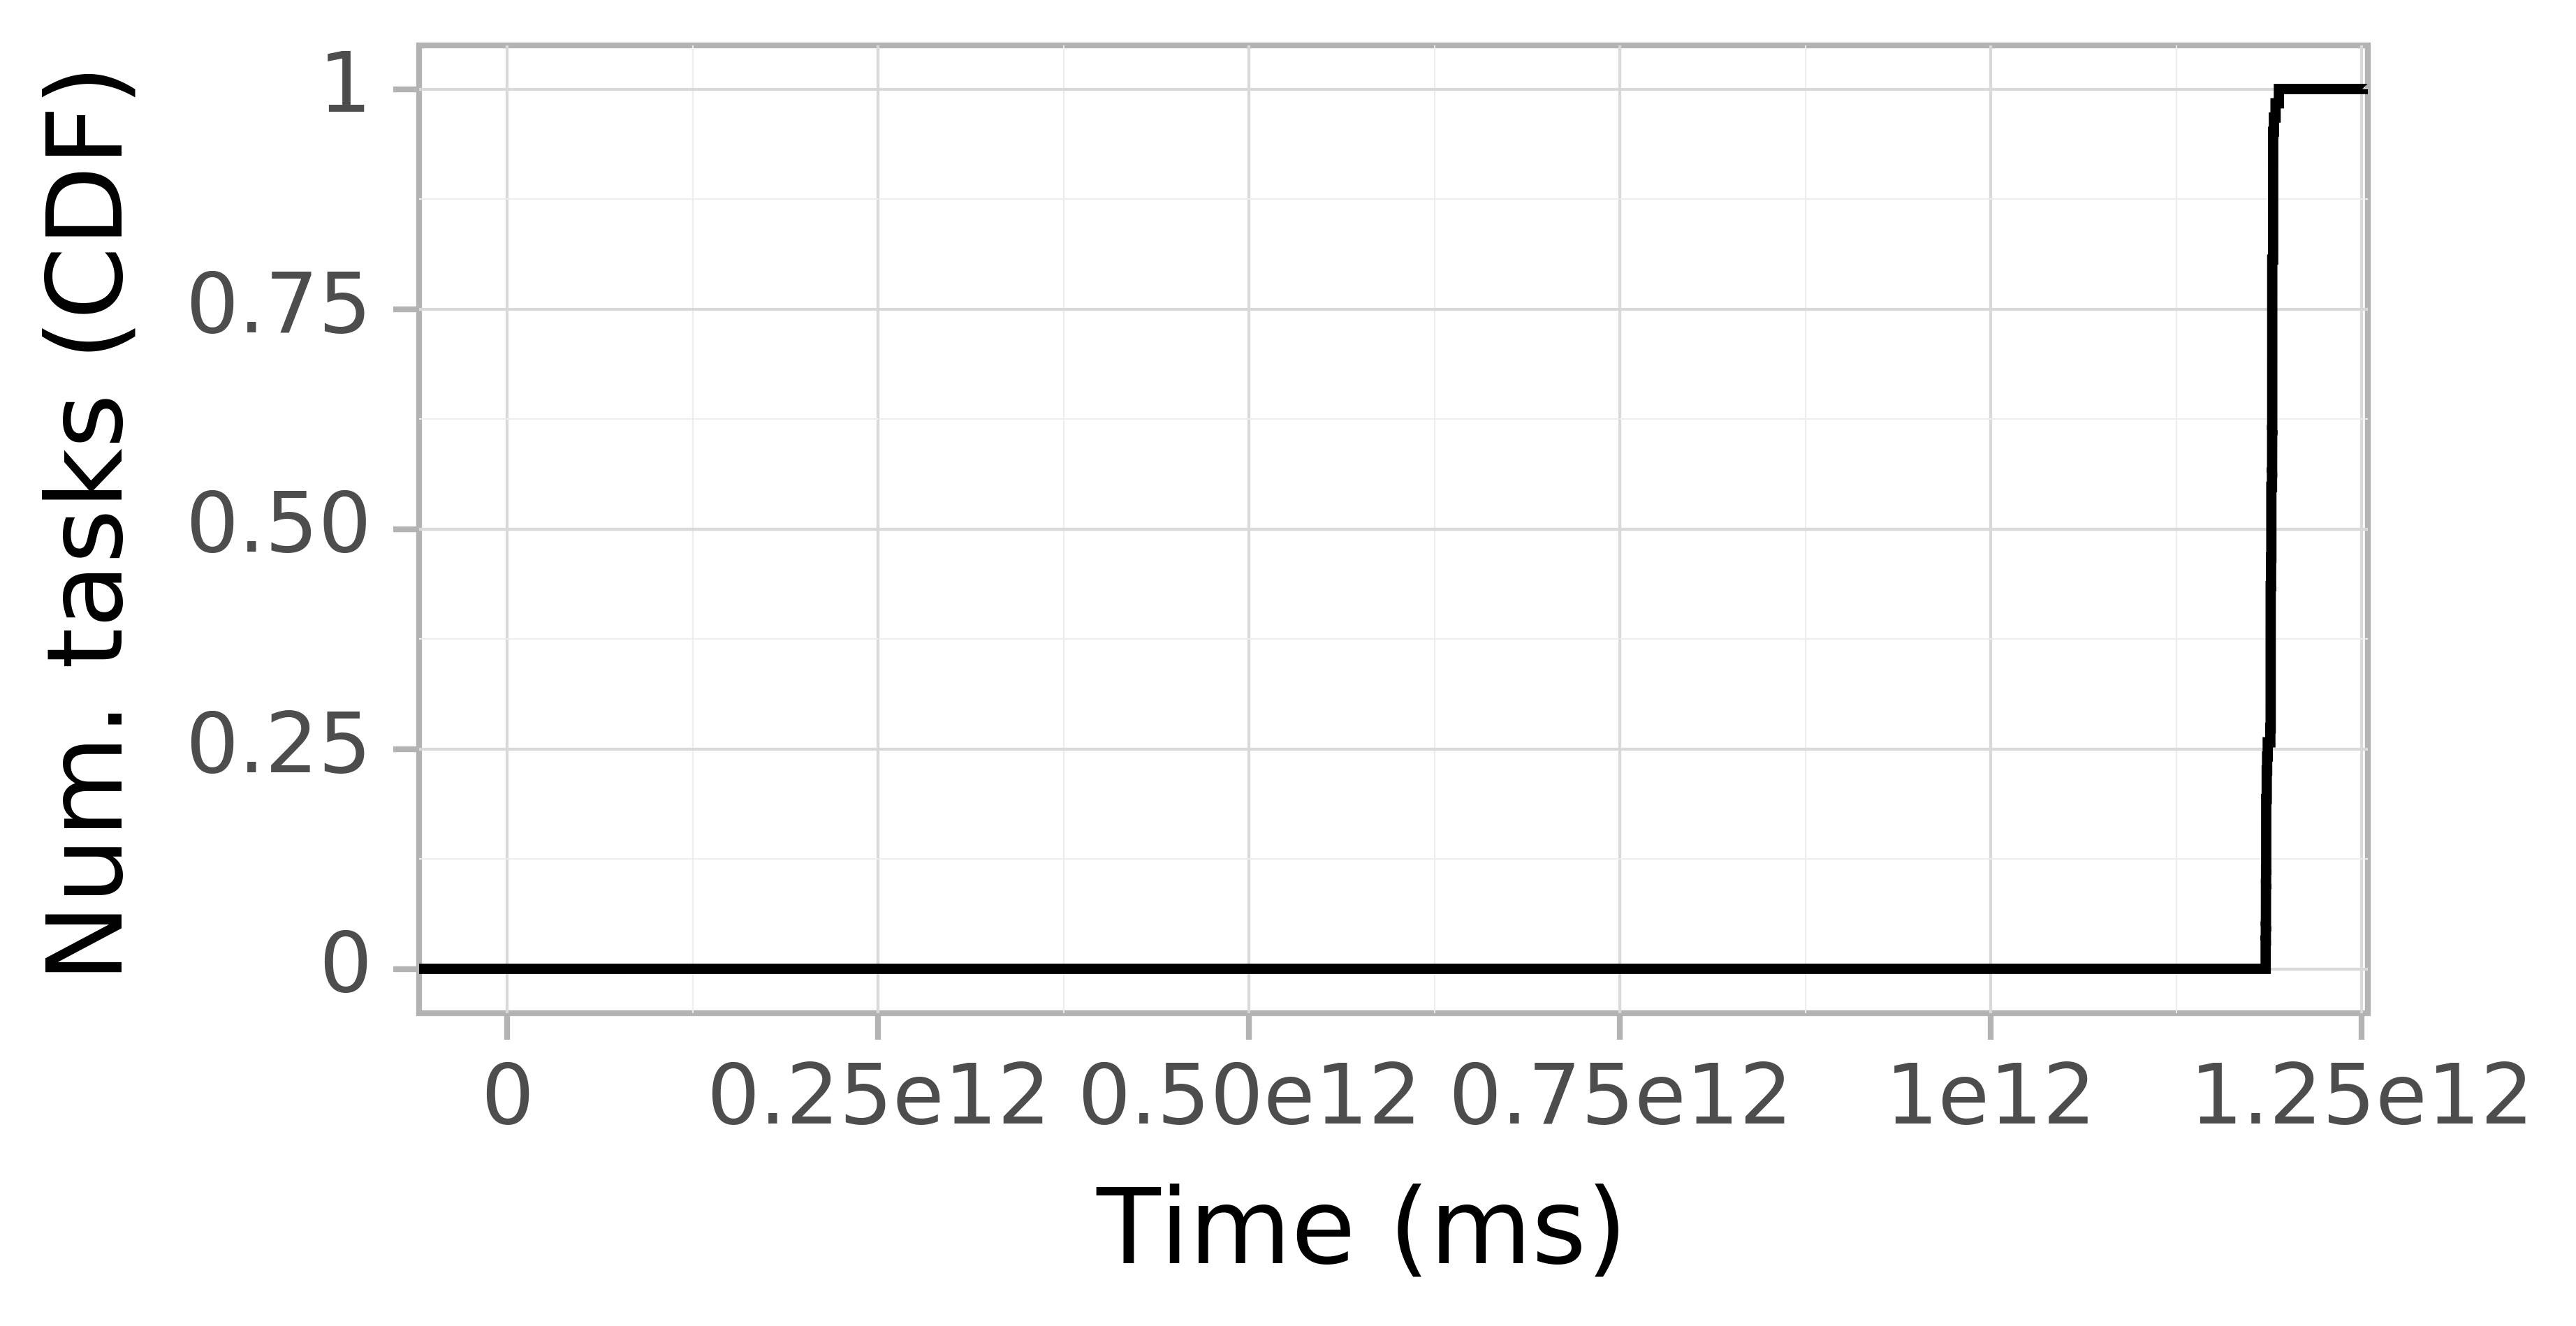 Task arrival CDF graph for the askalon_ee2 trace.